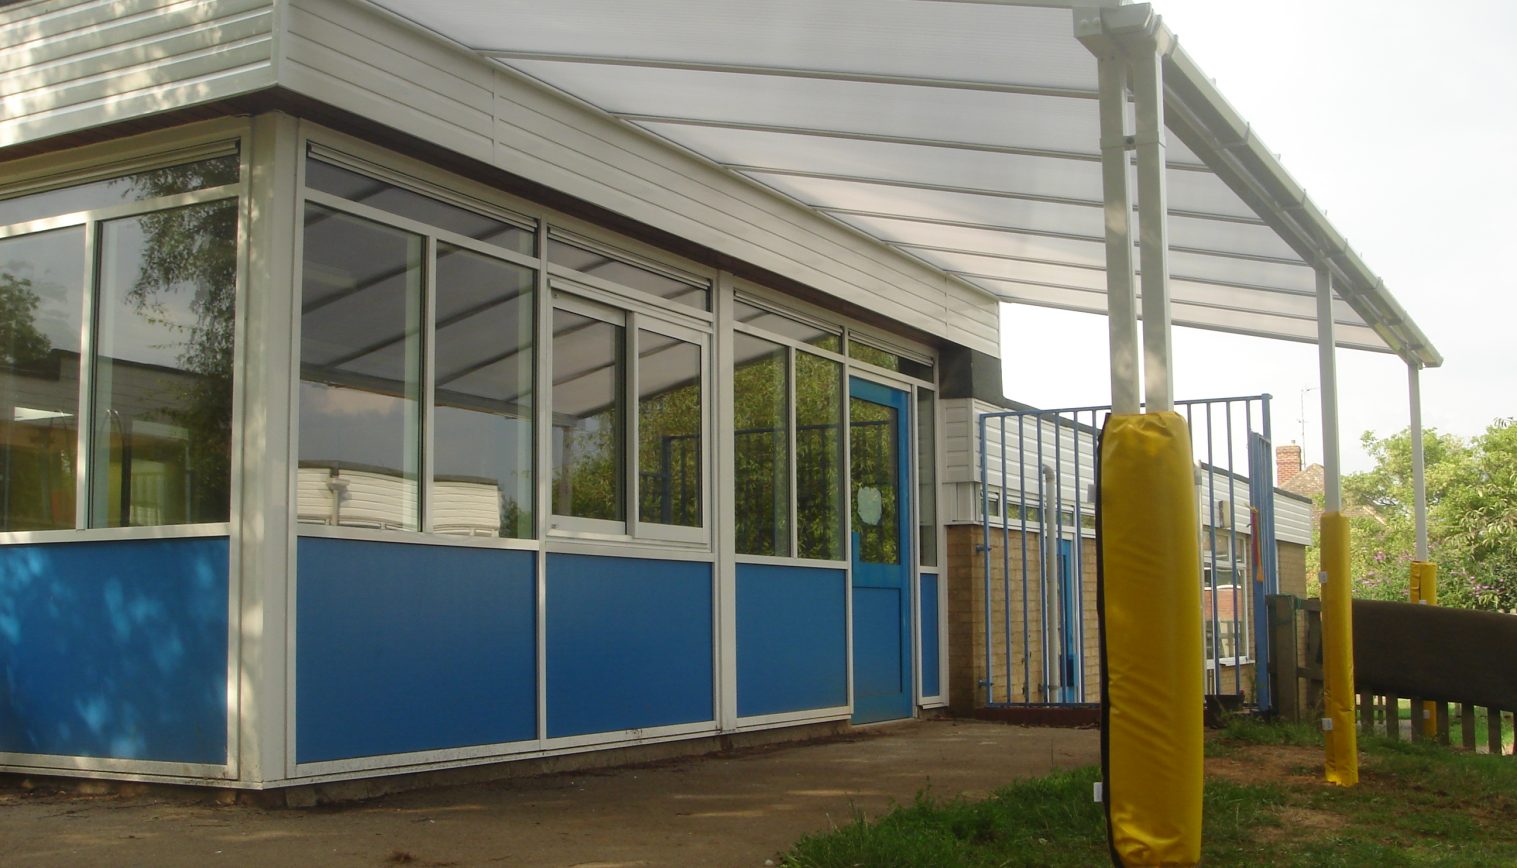 Queensway School – Wall Mounted Canopy